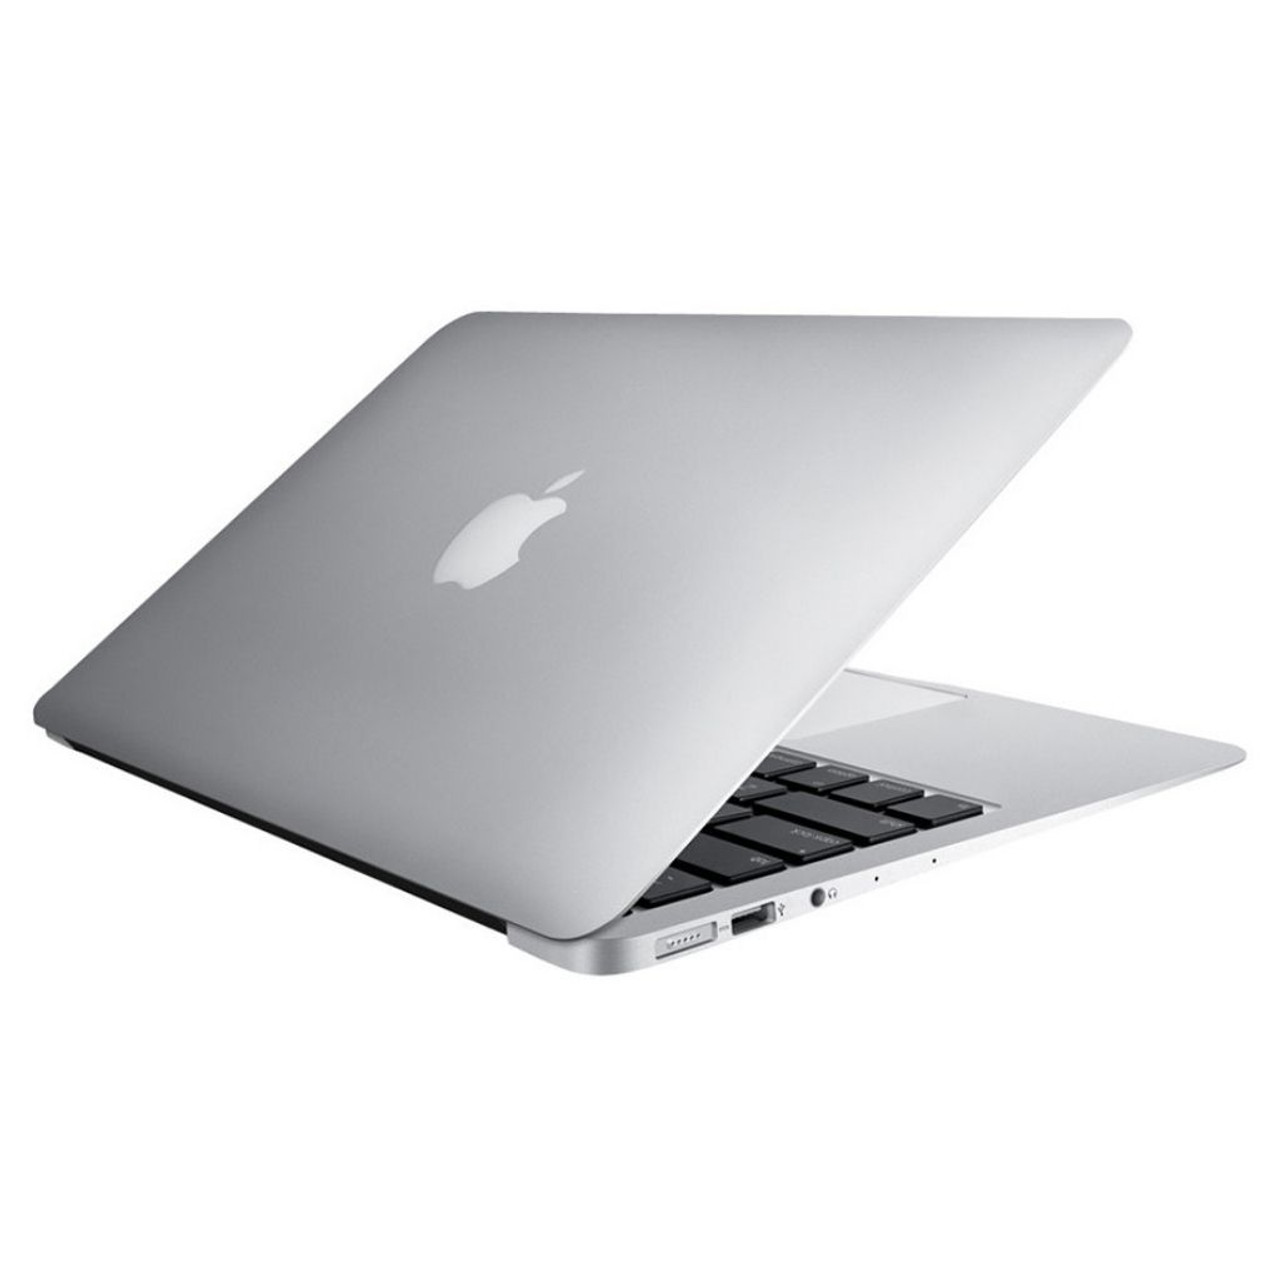 Apple® MacBook Air with Protective Case, Core i5, 4GB RAM, 256GB SSD product image